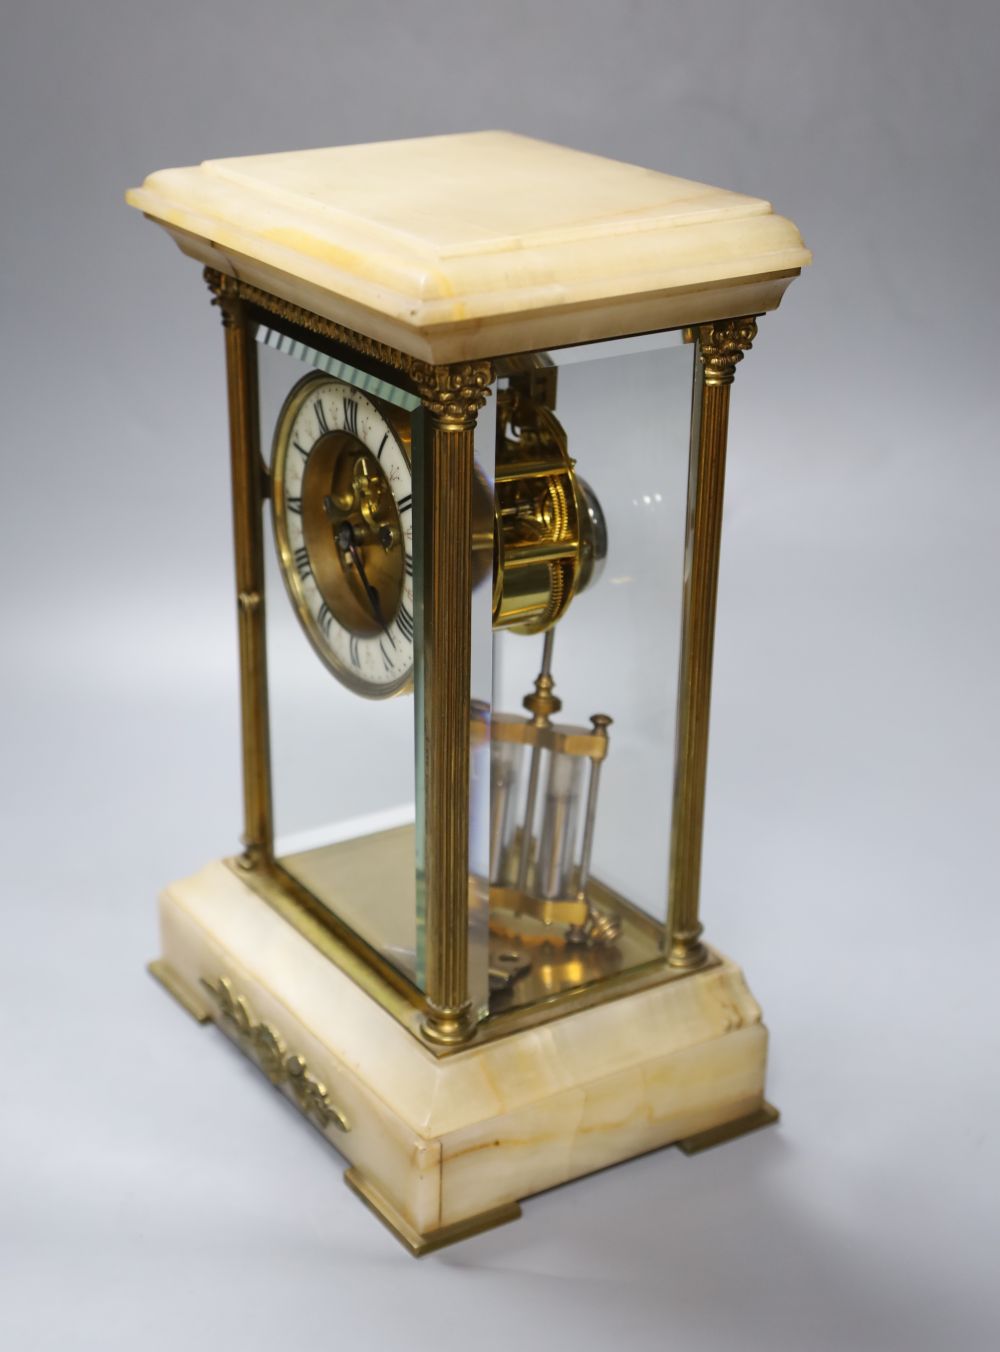 An early 20th century French brass and onyx four glass clock